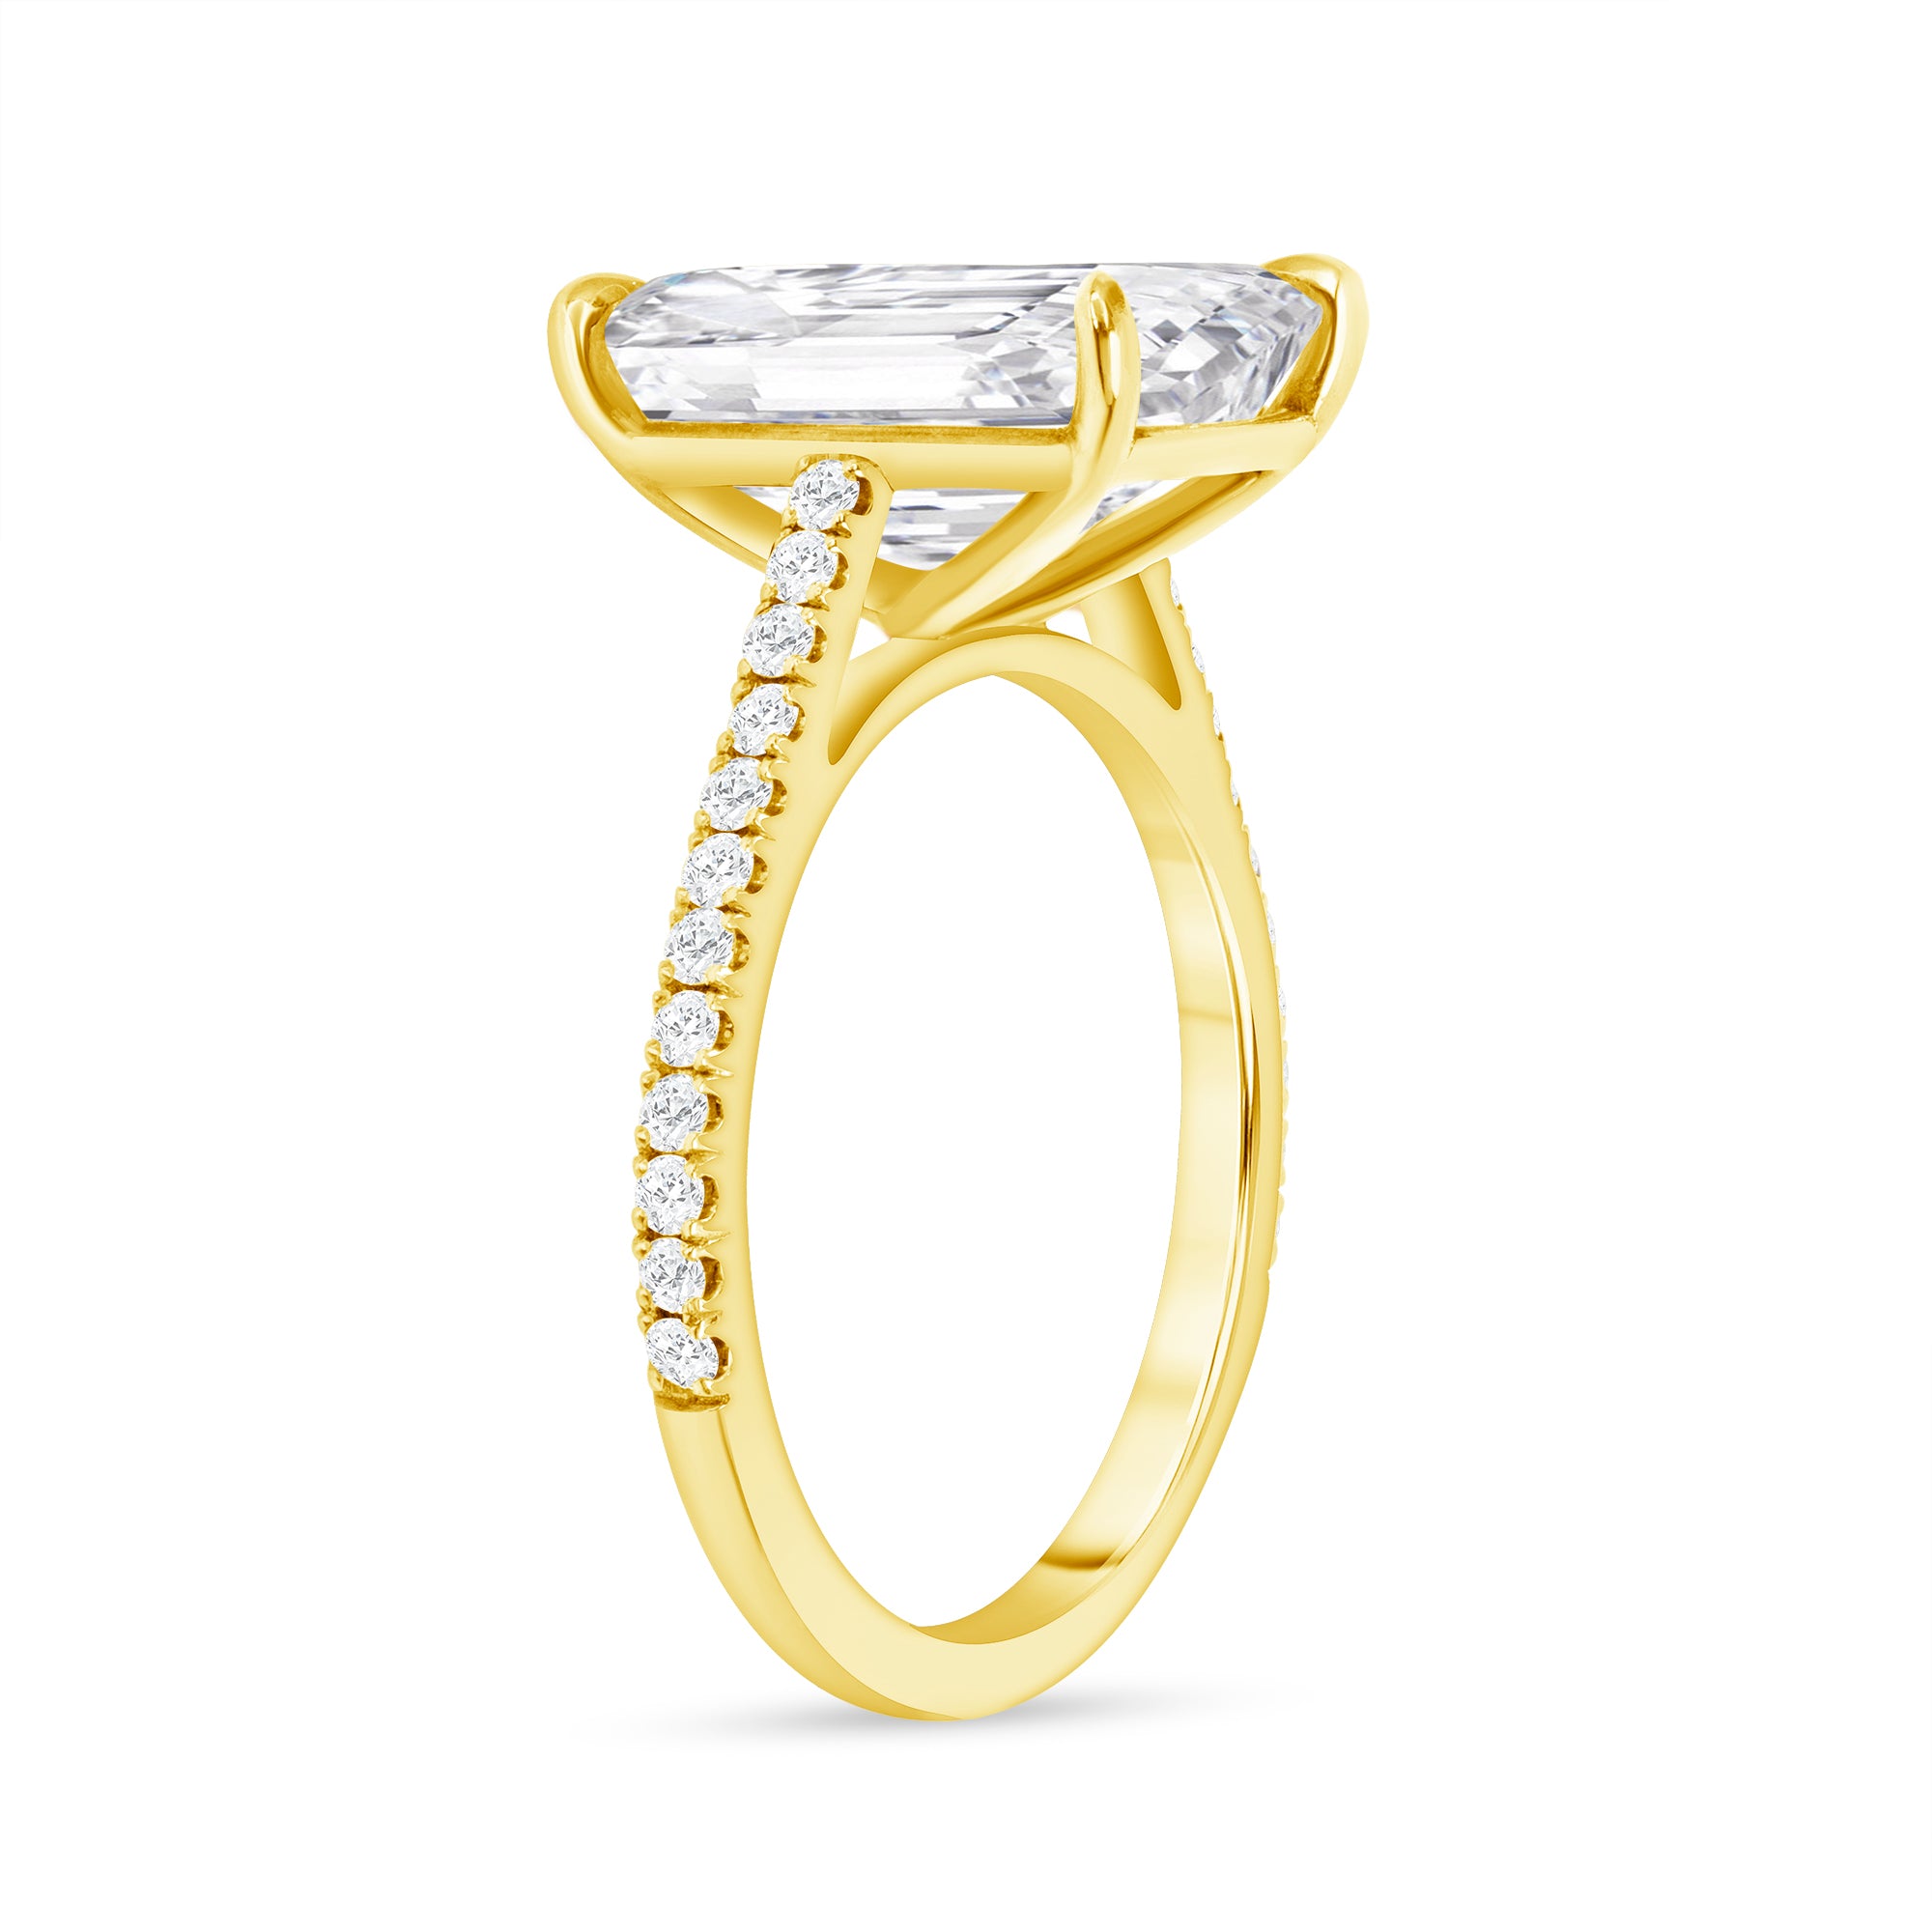 5.02ct Radiant Cut Diamond Ring in Pavé Gold Band, GIA Certified